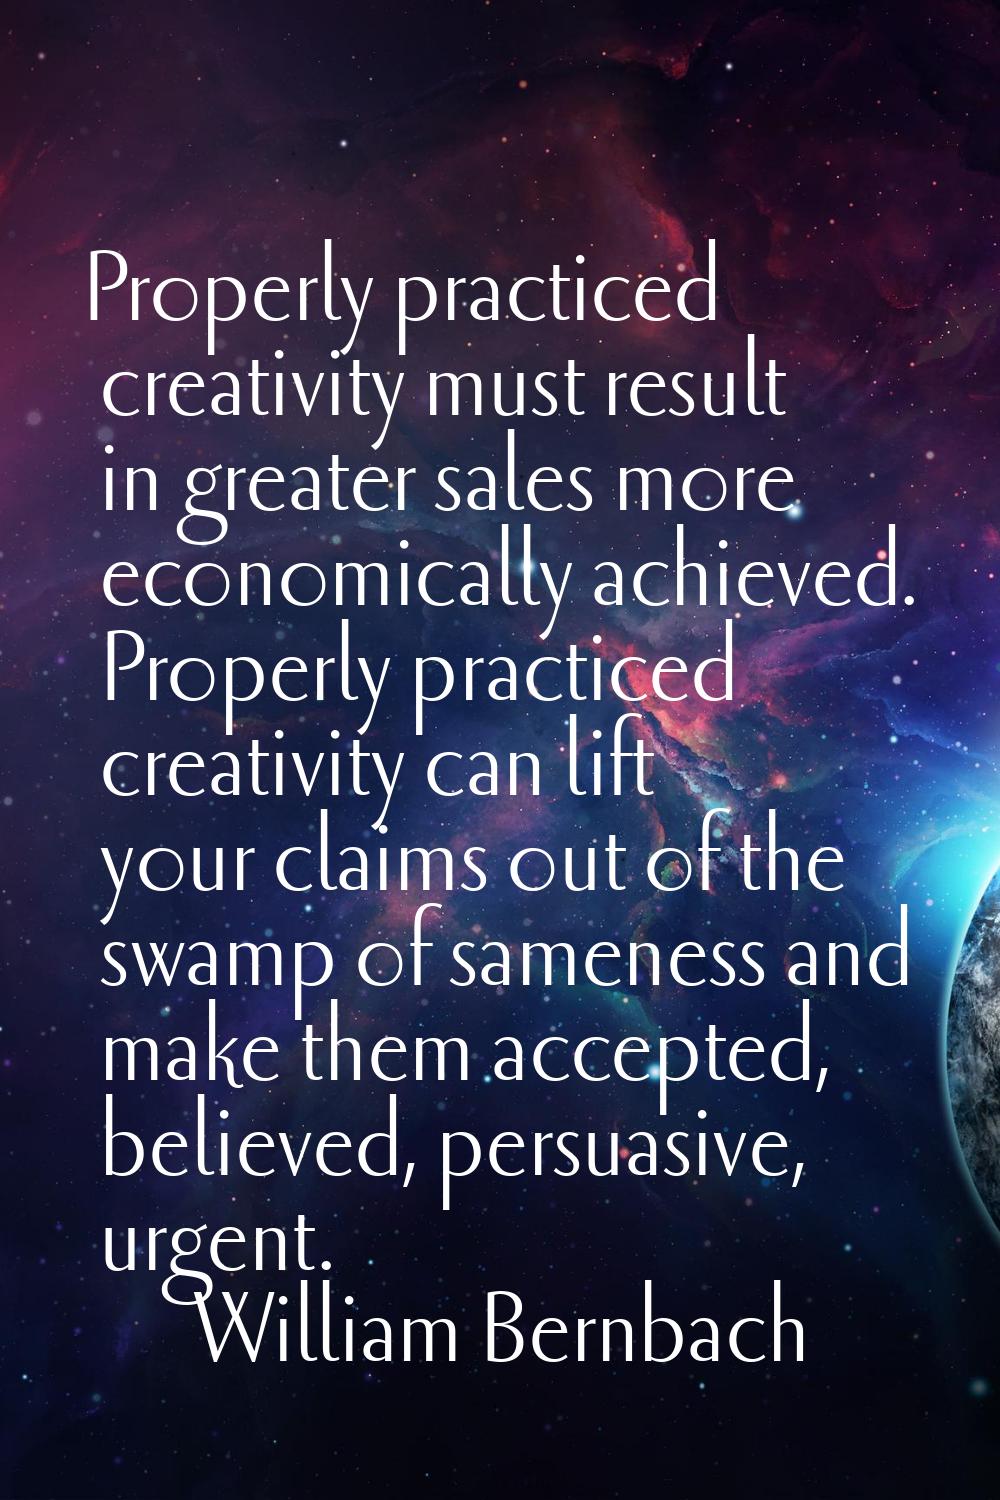 Properly practiced creativity must result in greater sales more economically achieved. Properly pra